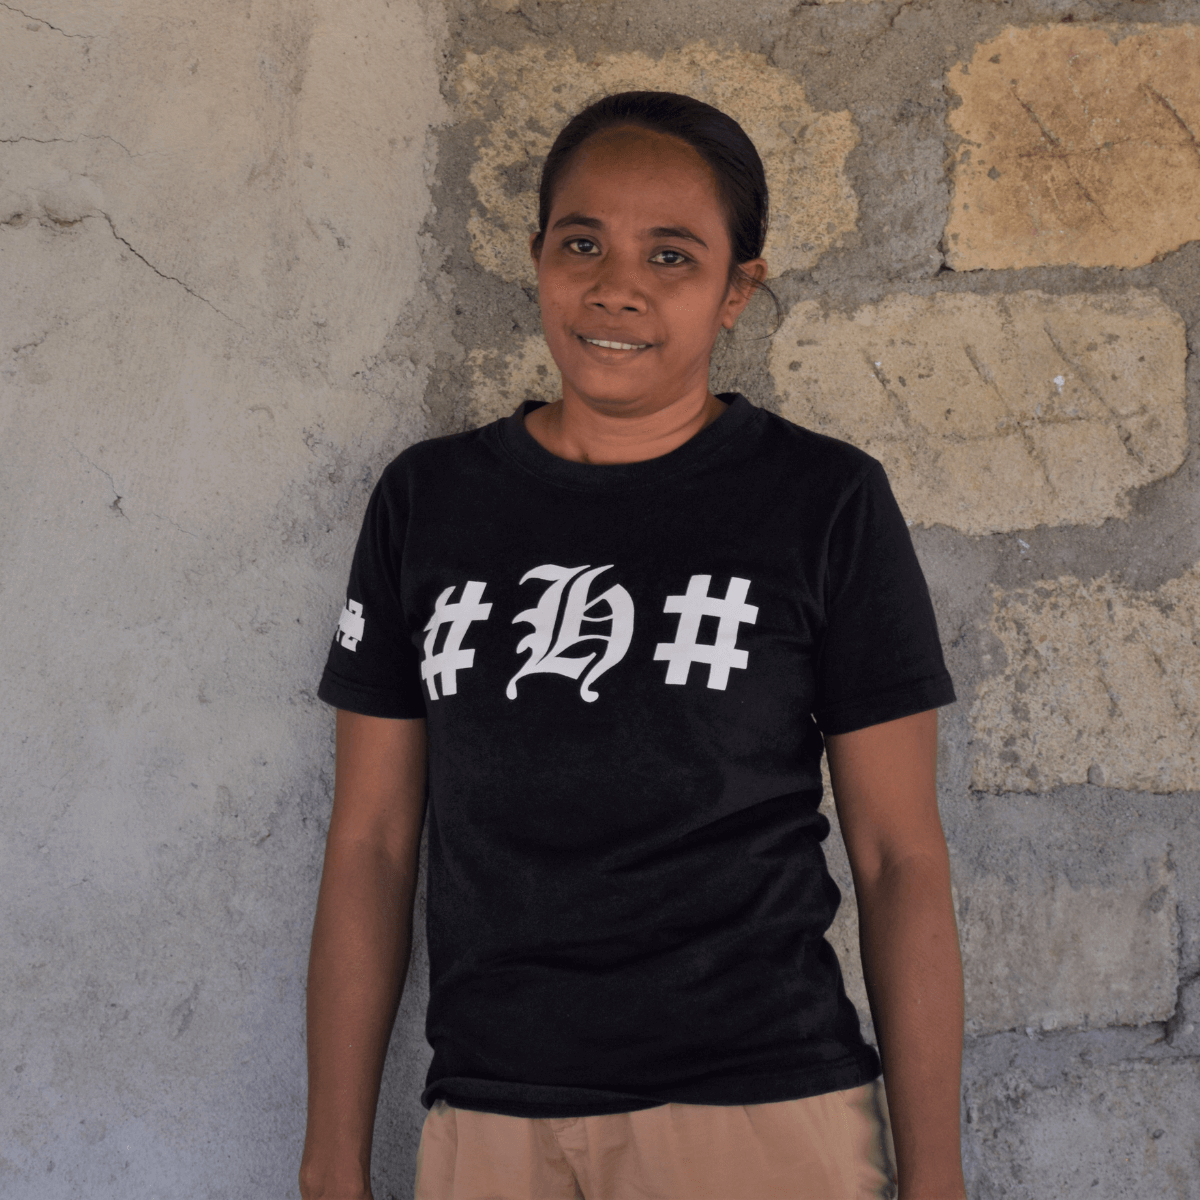 Oecusse, Timor-Leste: Ana started her own business after joining a savings group established by Oxfam and local partner Masine Neu Oecusse. Oxfam acknowledges the support of the Australian Government through the Australian NGO Cooperation Program (ANCP). Photo: Oxfam.